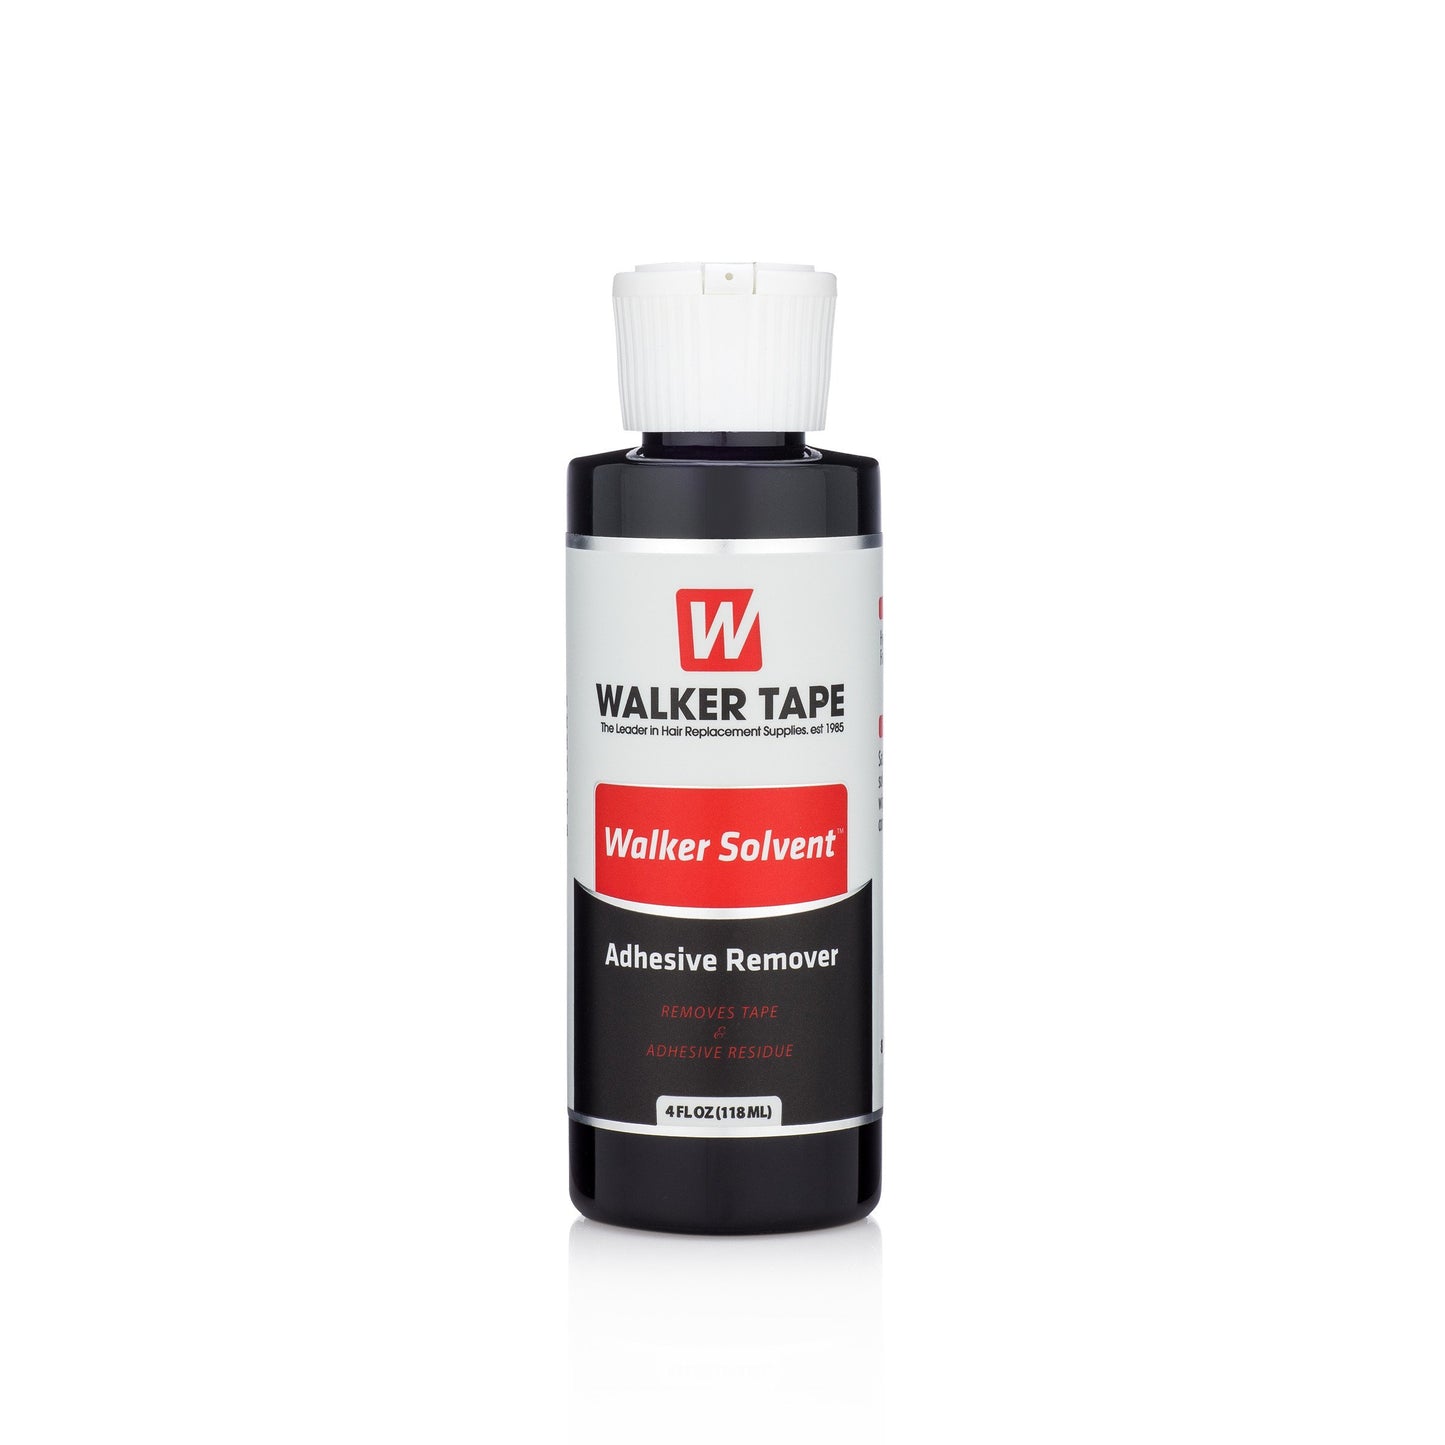 WALKER SOLVENT by Walker Tape - VIP Extensions